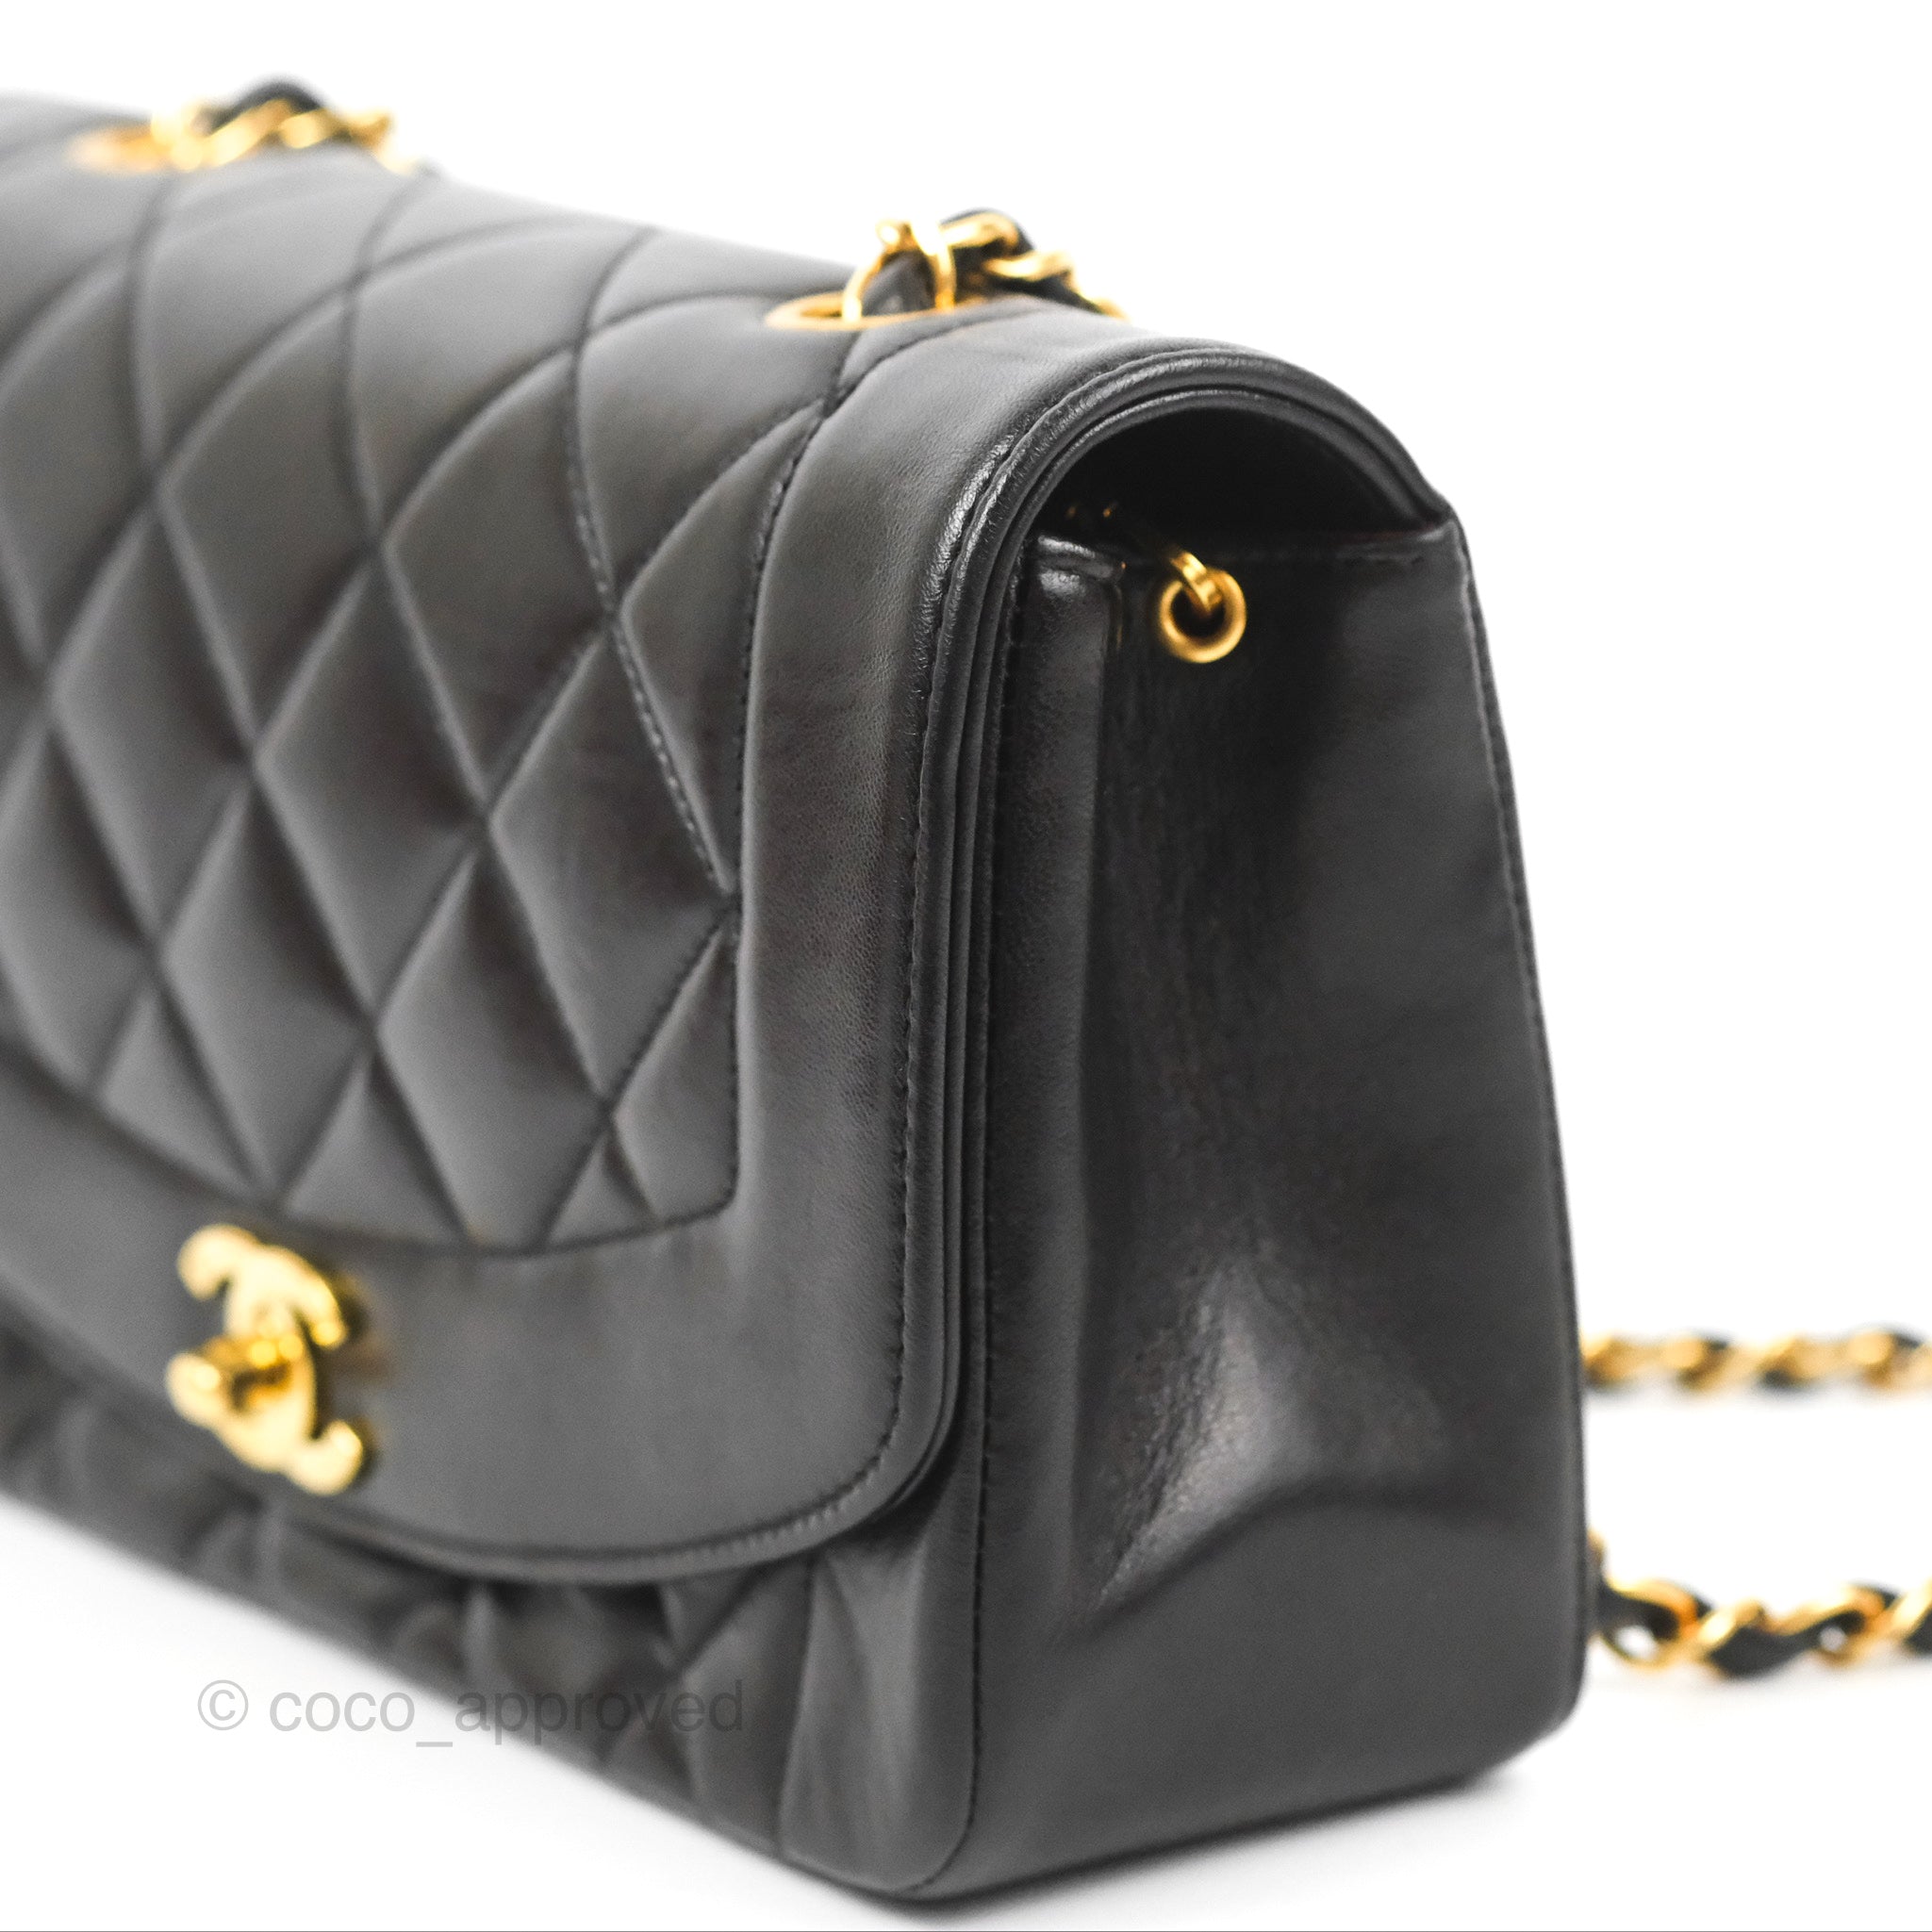 Chanel Vintage Black Quilted Lambskin Small Diana Flap Bag Gold